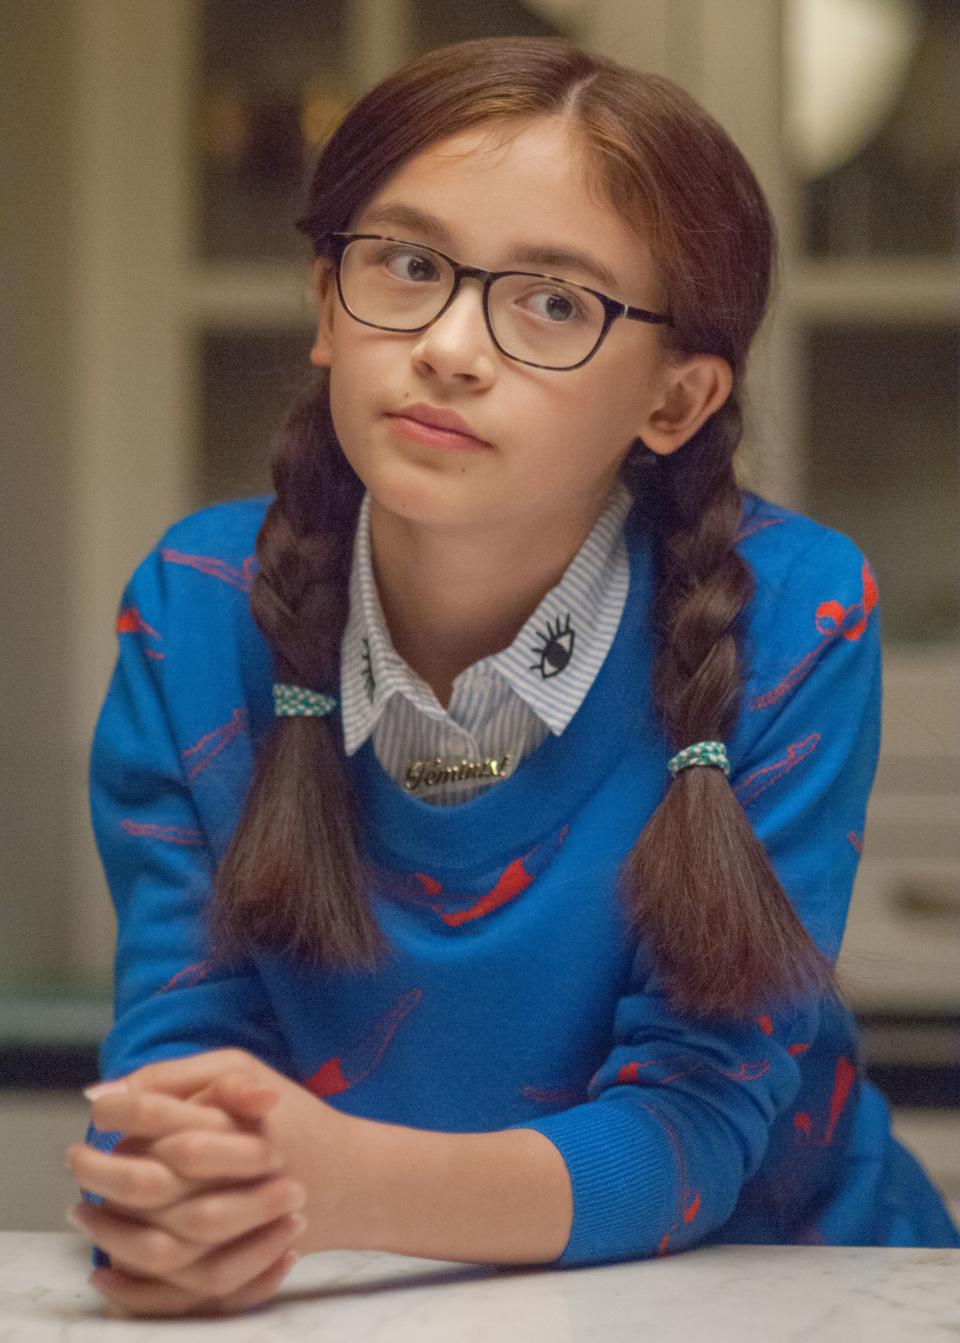 Anna Cathcart with braided hair wearing glasses and a patterned sweater